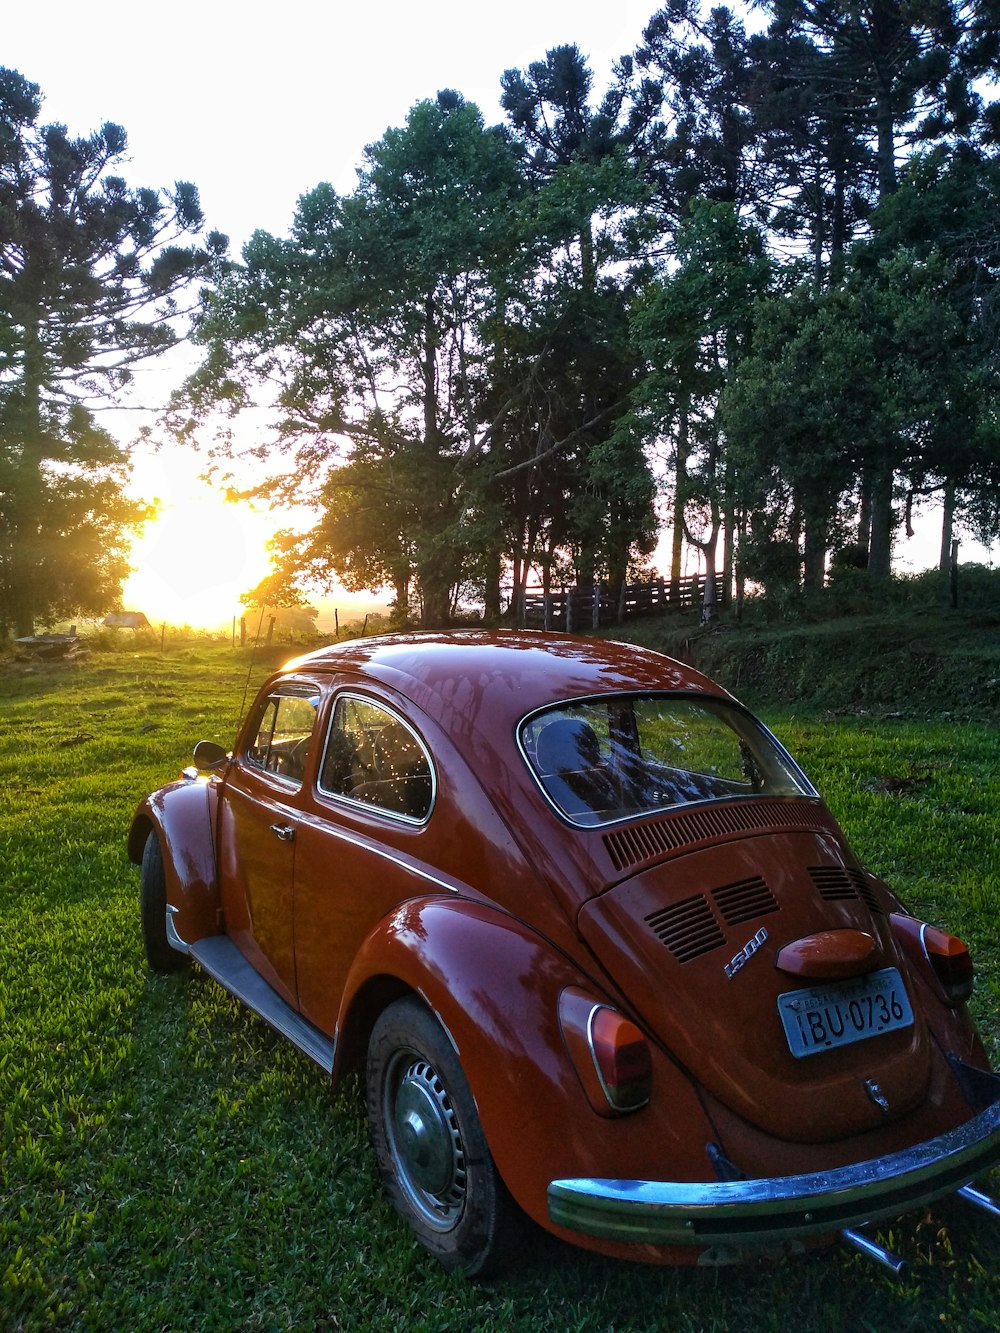 classic red Volkswagen Beetle coupe on grass field near trees during golden hour